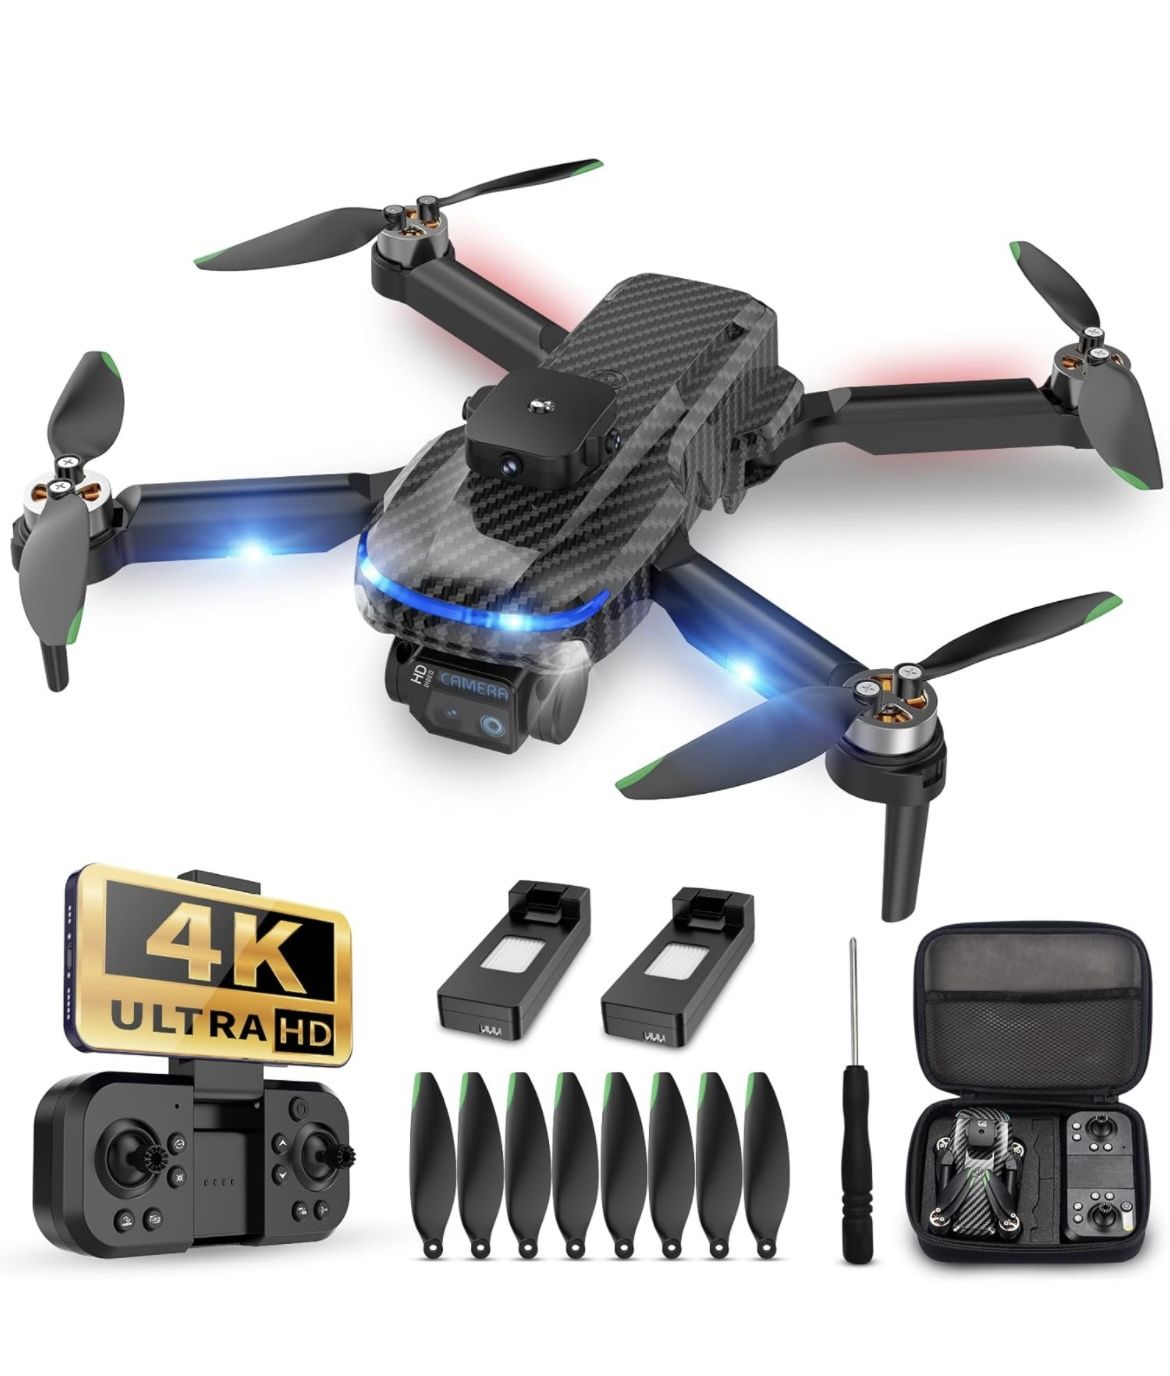 Ultimate 4K FPV Mini Drone Toy - Foldable, Carrying Case, Adjustable Lens, One Key Take Off/Land, Brushless Motor, Headless Mode, Obstacle Avoidance